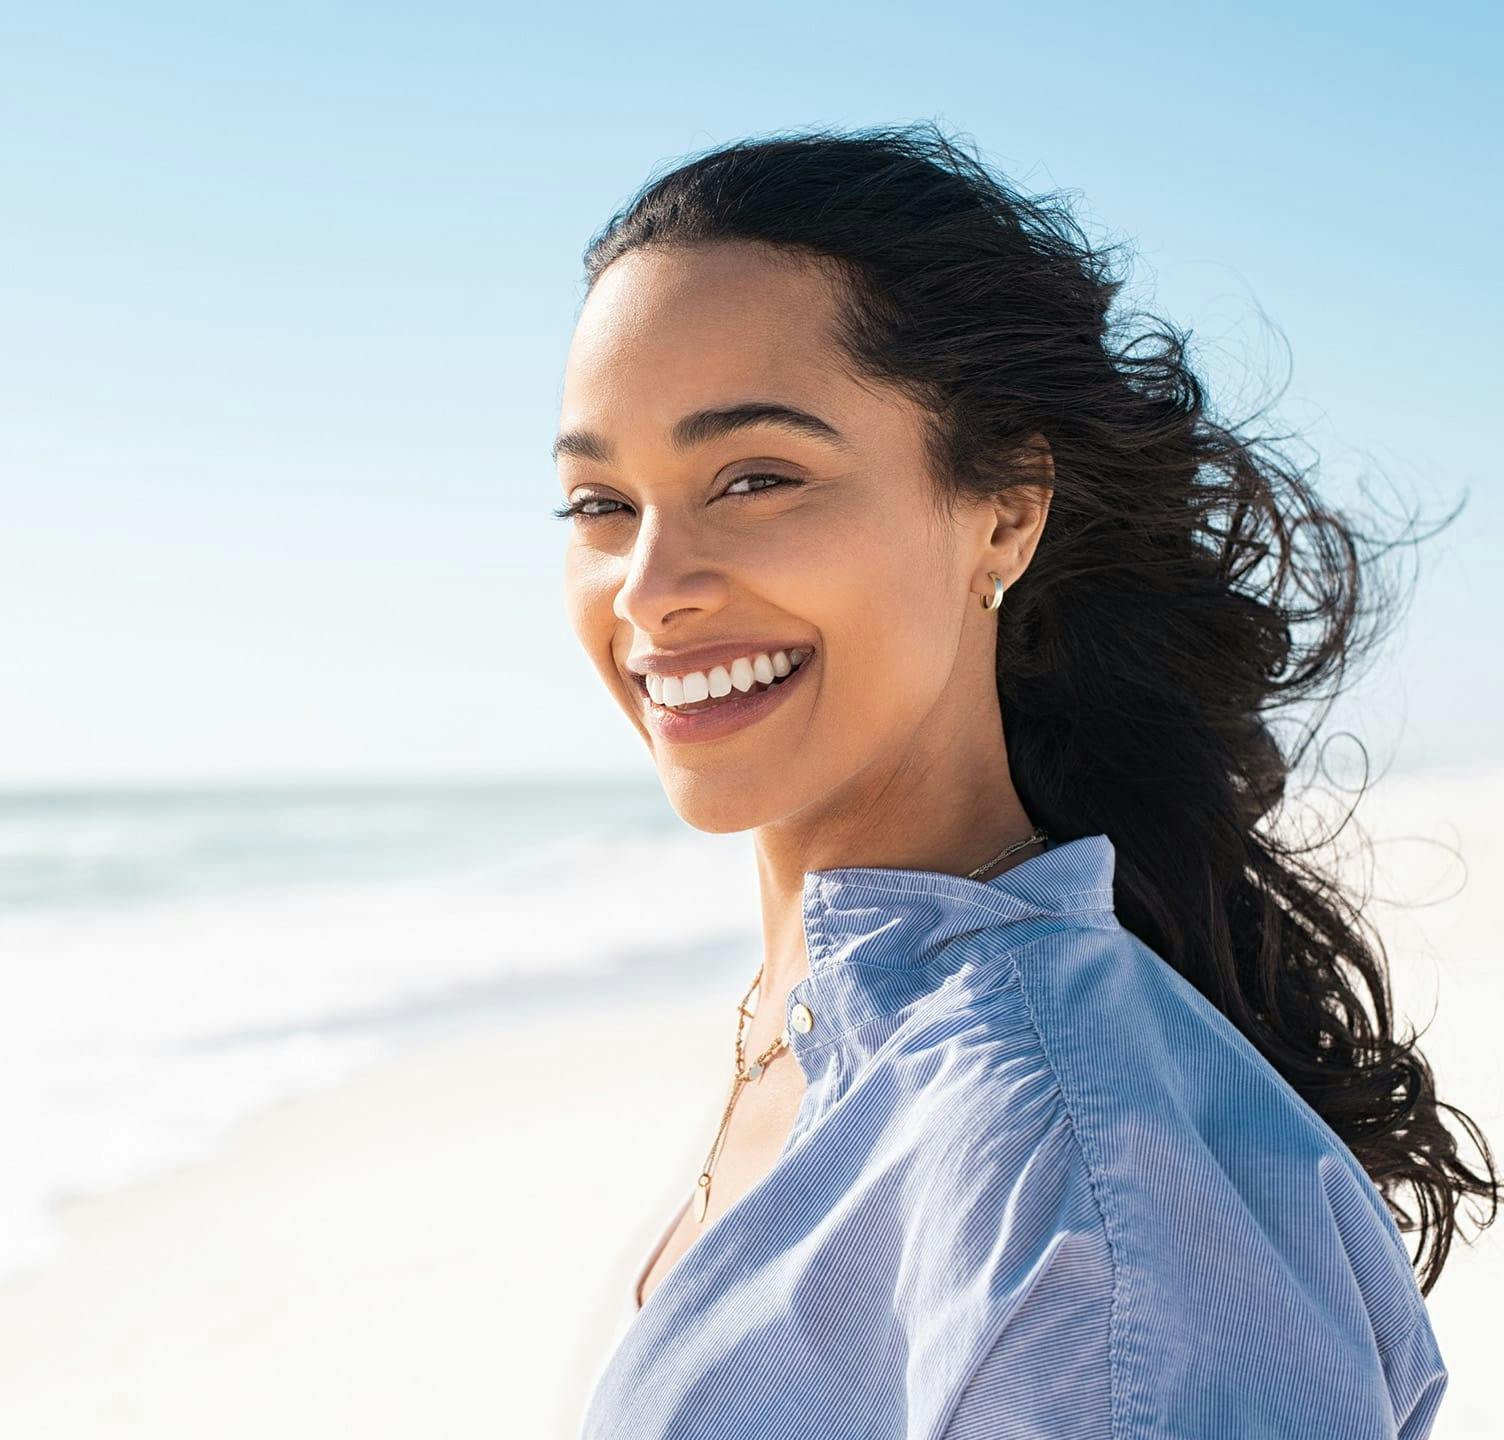 Woman smiling and standing on the beach